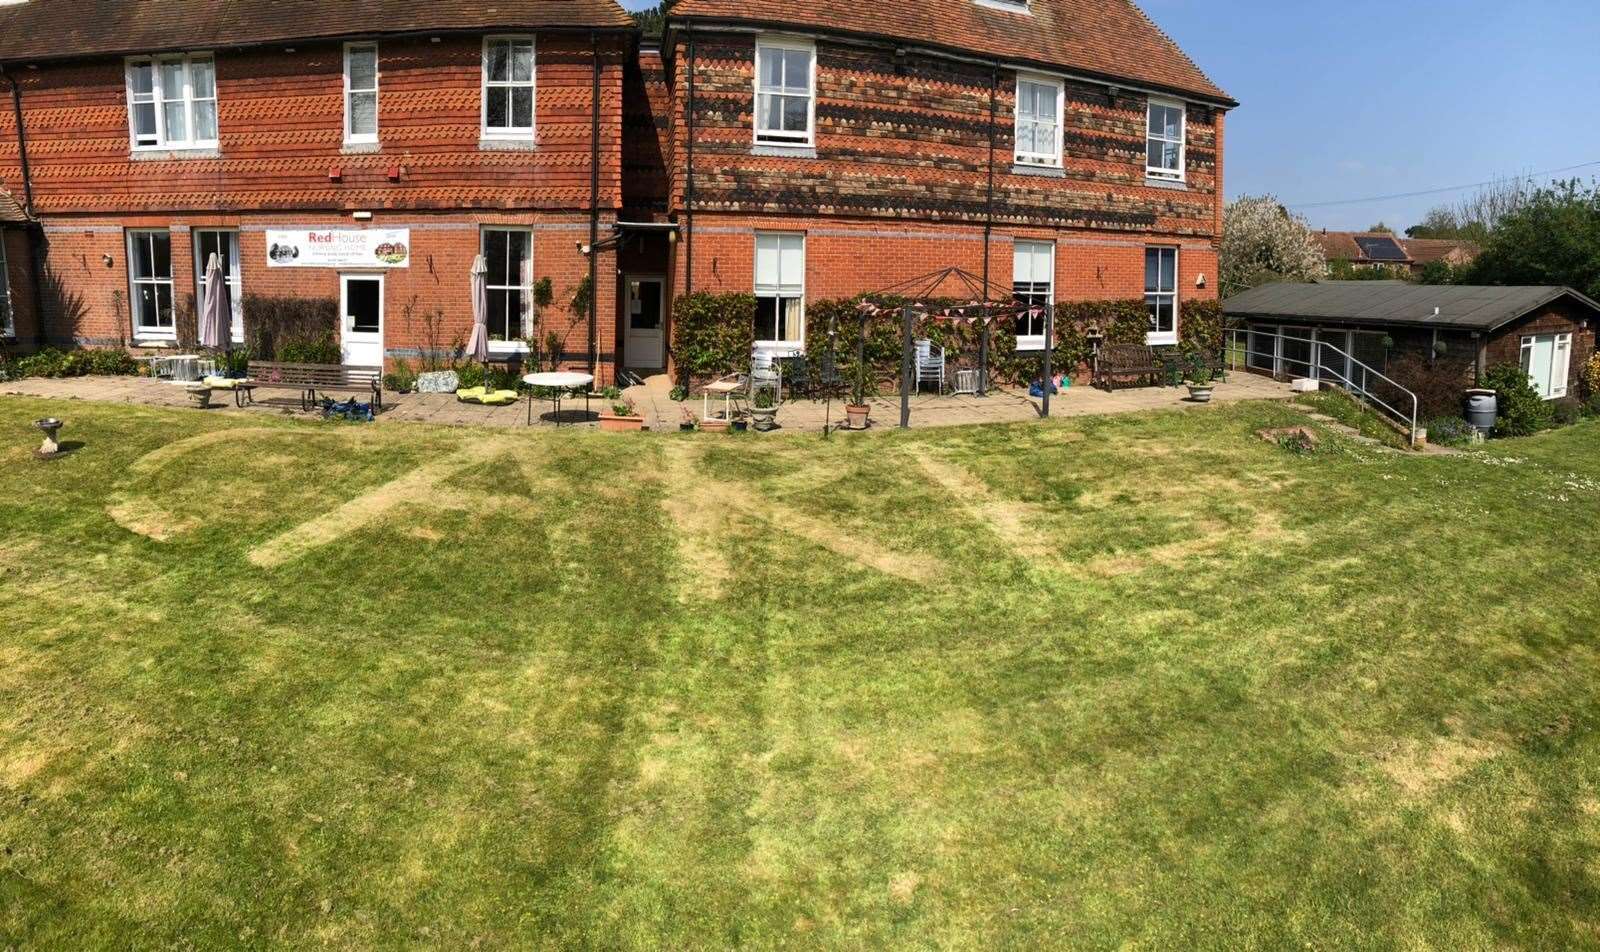 Steven Kirkham mowed "CARE" into the grass. Picture: Kevin D'Lima